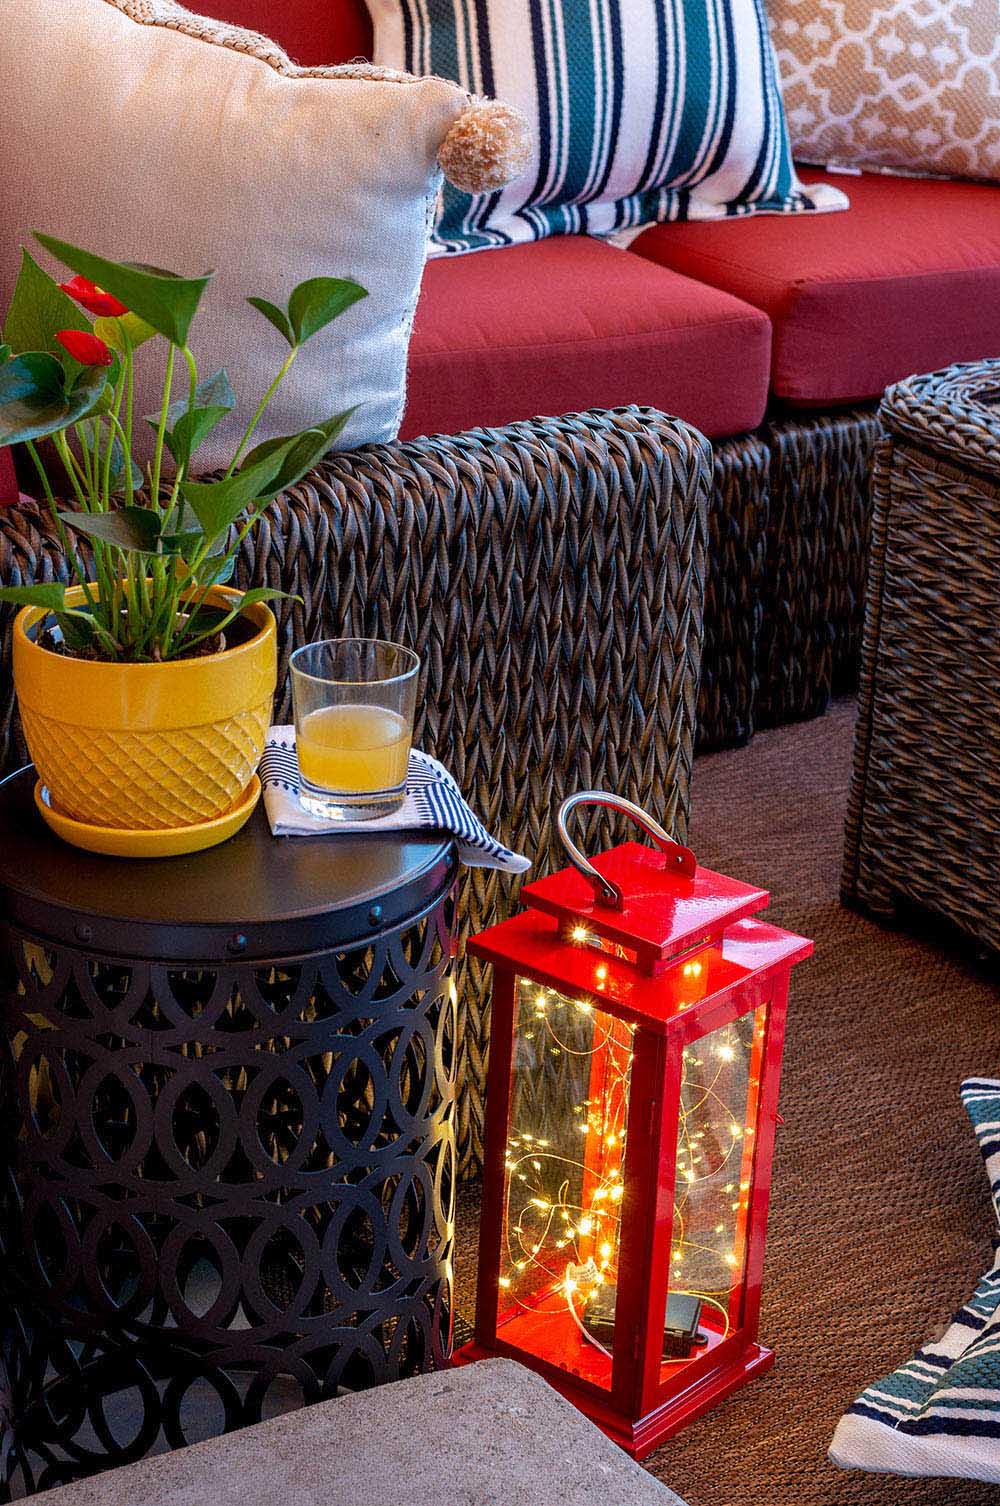 A red lantern filled with string lights sits next to a black garden stool with a yellow planter.